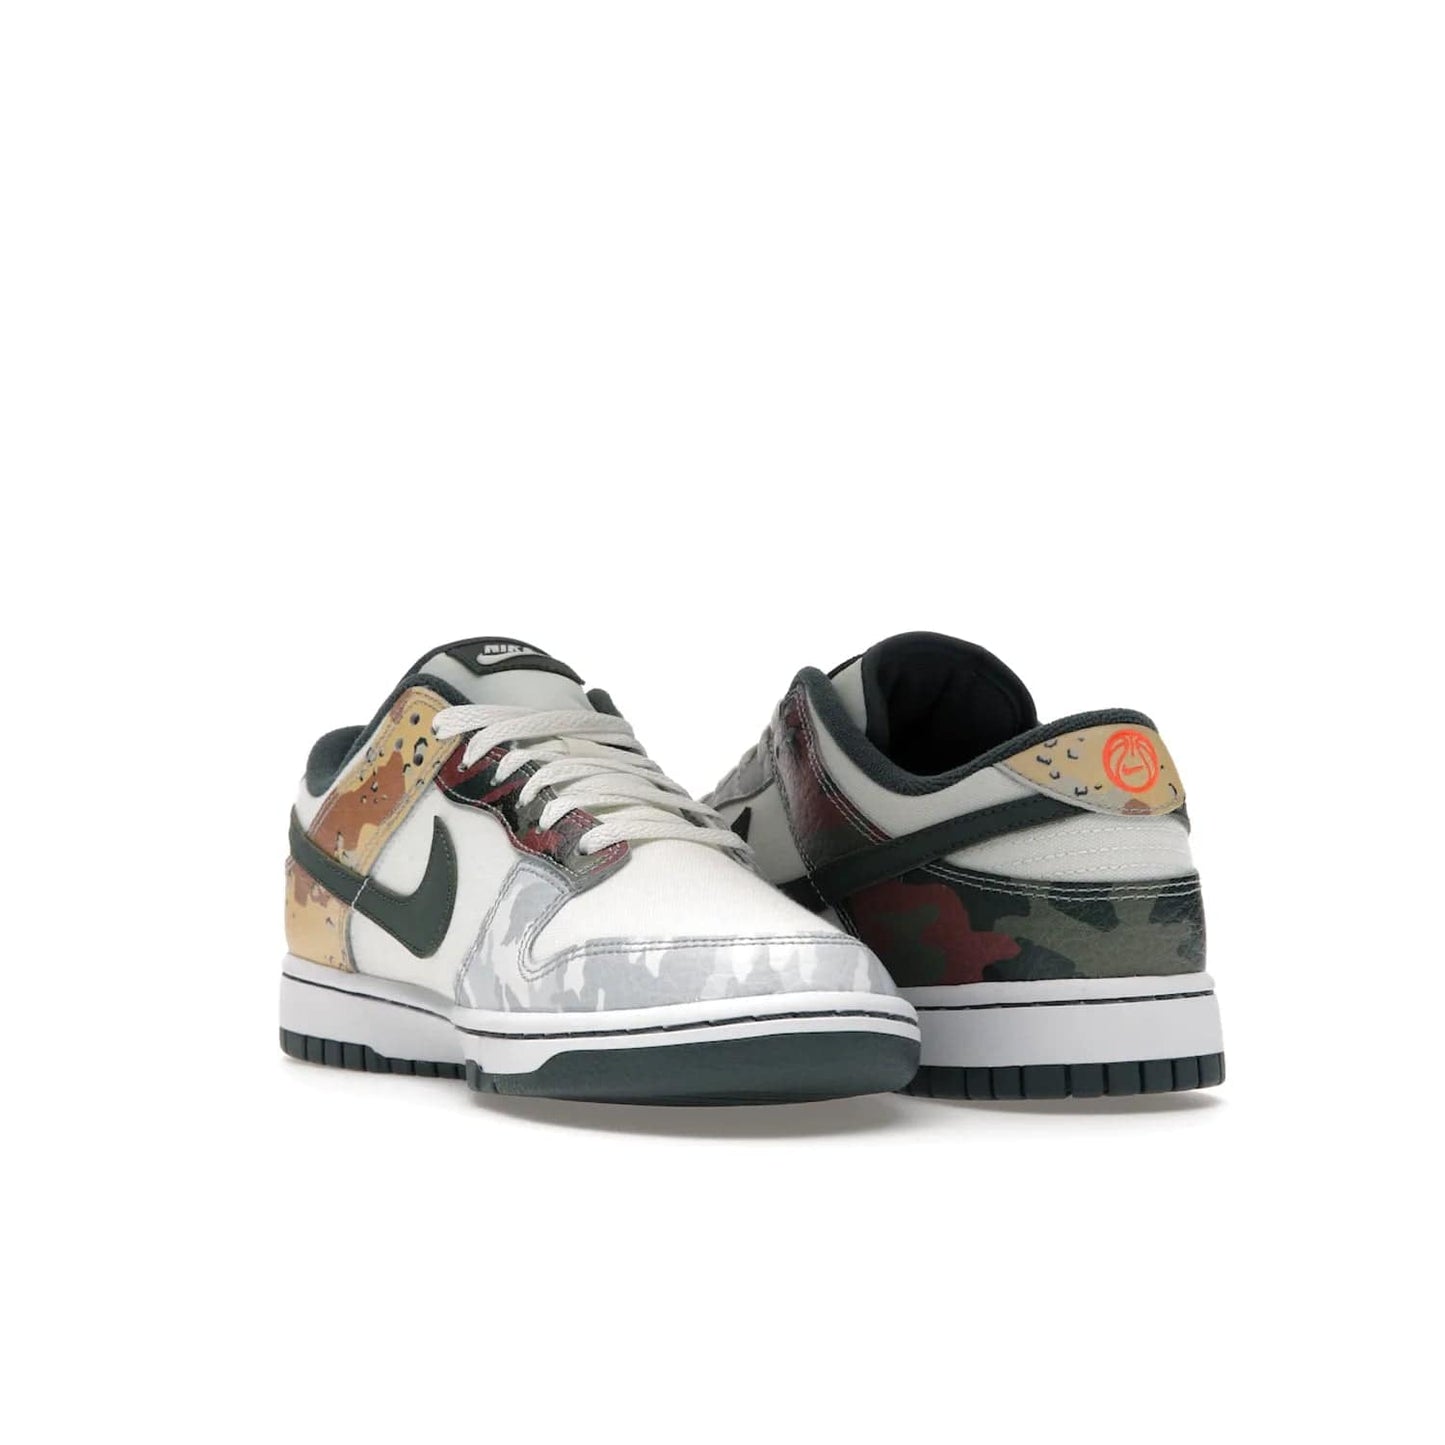 Nike Dunk Low SE Sail Multi-Camo - Image 25 - Only at www.BallersClubKickz.com - Classic design meets statement style in the Nike Dunk Low SE Sail Multi-Camo. White leather base with multi-color camo overlays, vibrant Nike Swooshes, and orange Nike embroidery. Get yours August 2021.